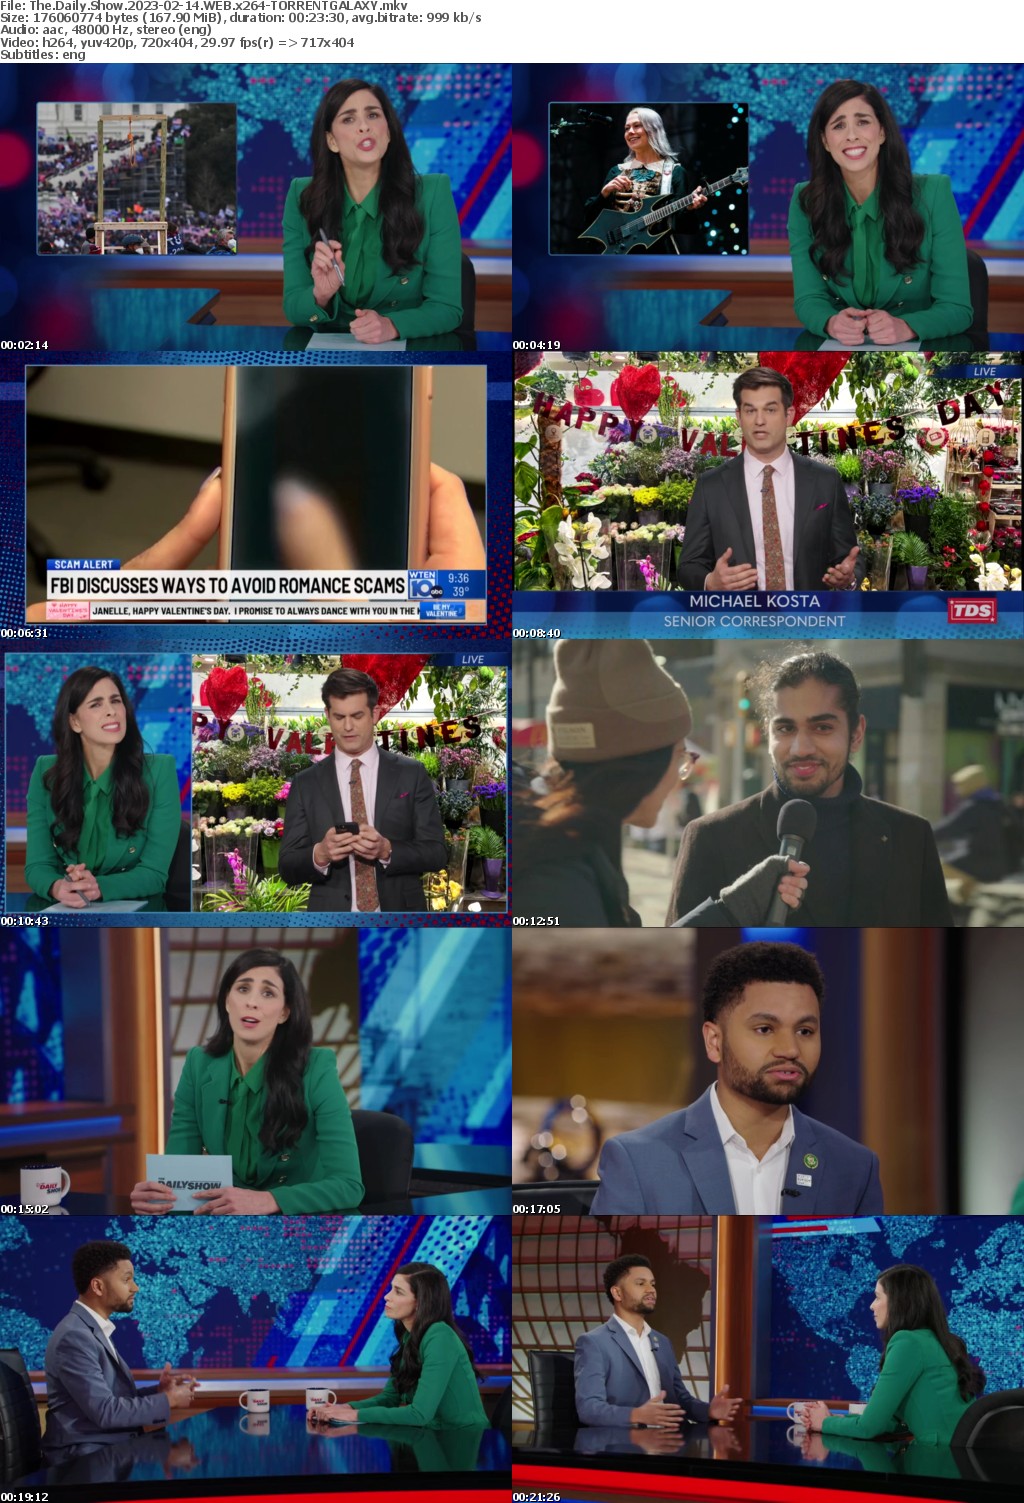 The Daily Show 2023-02-14 WEB x264-GALAXY